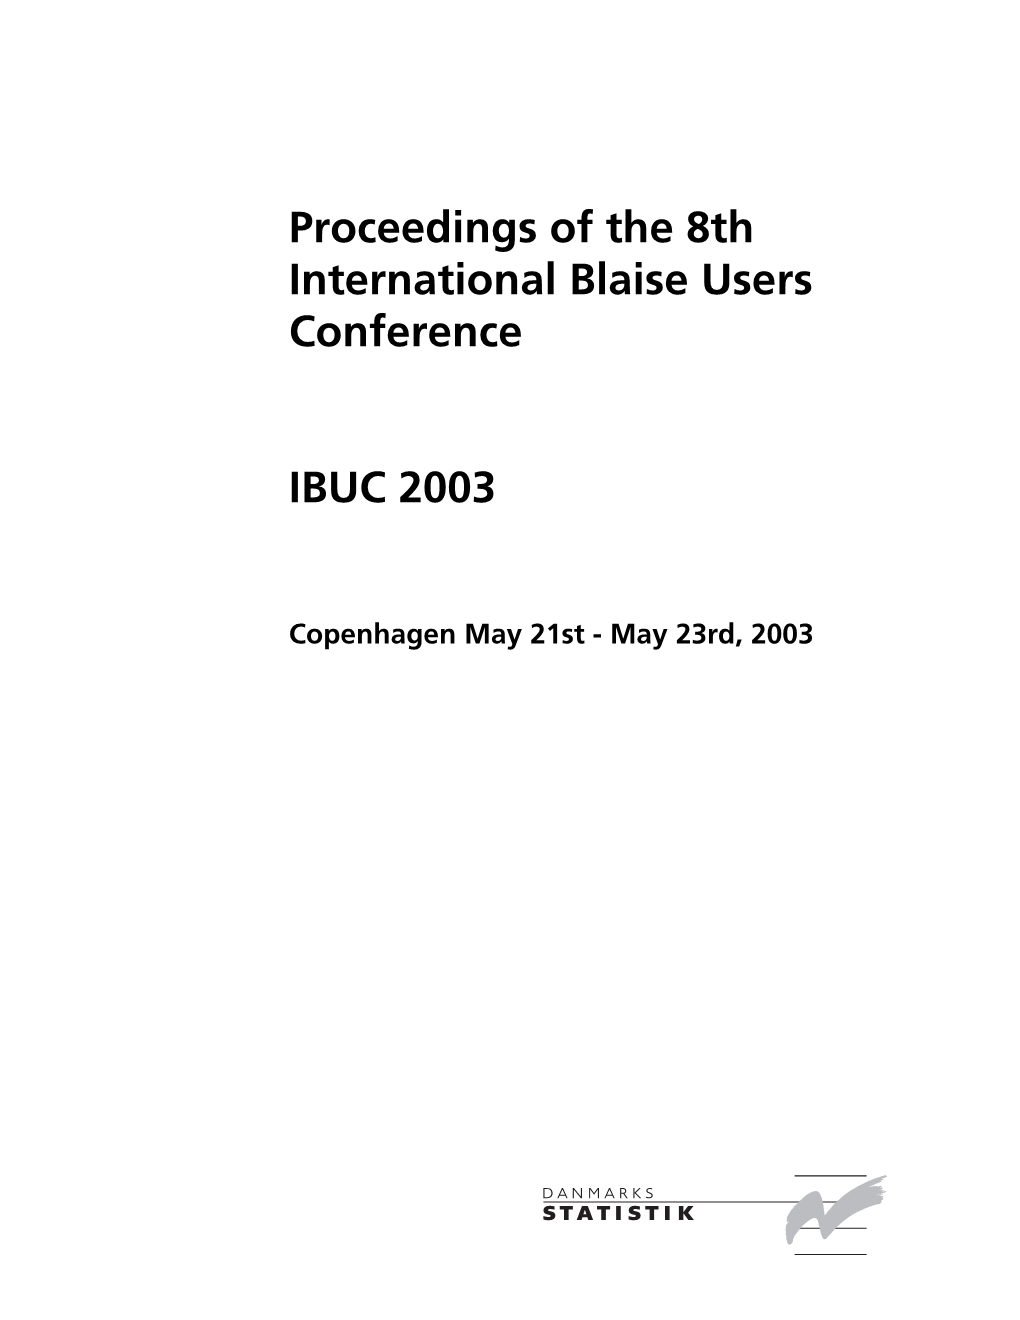 Proceedings of the 8Th International Blaise Users Conference IBUC 2003